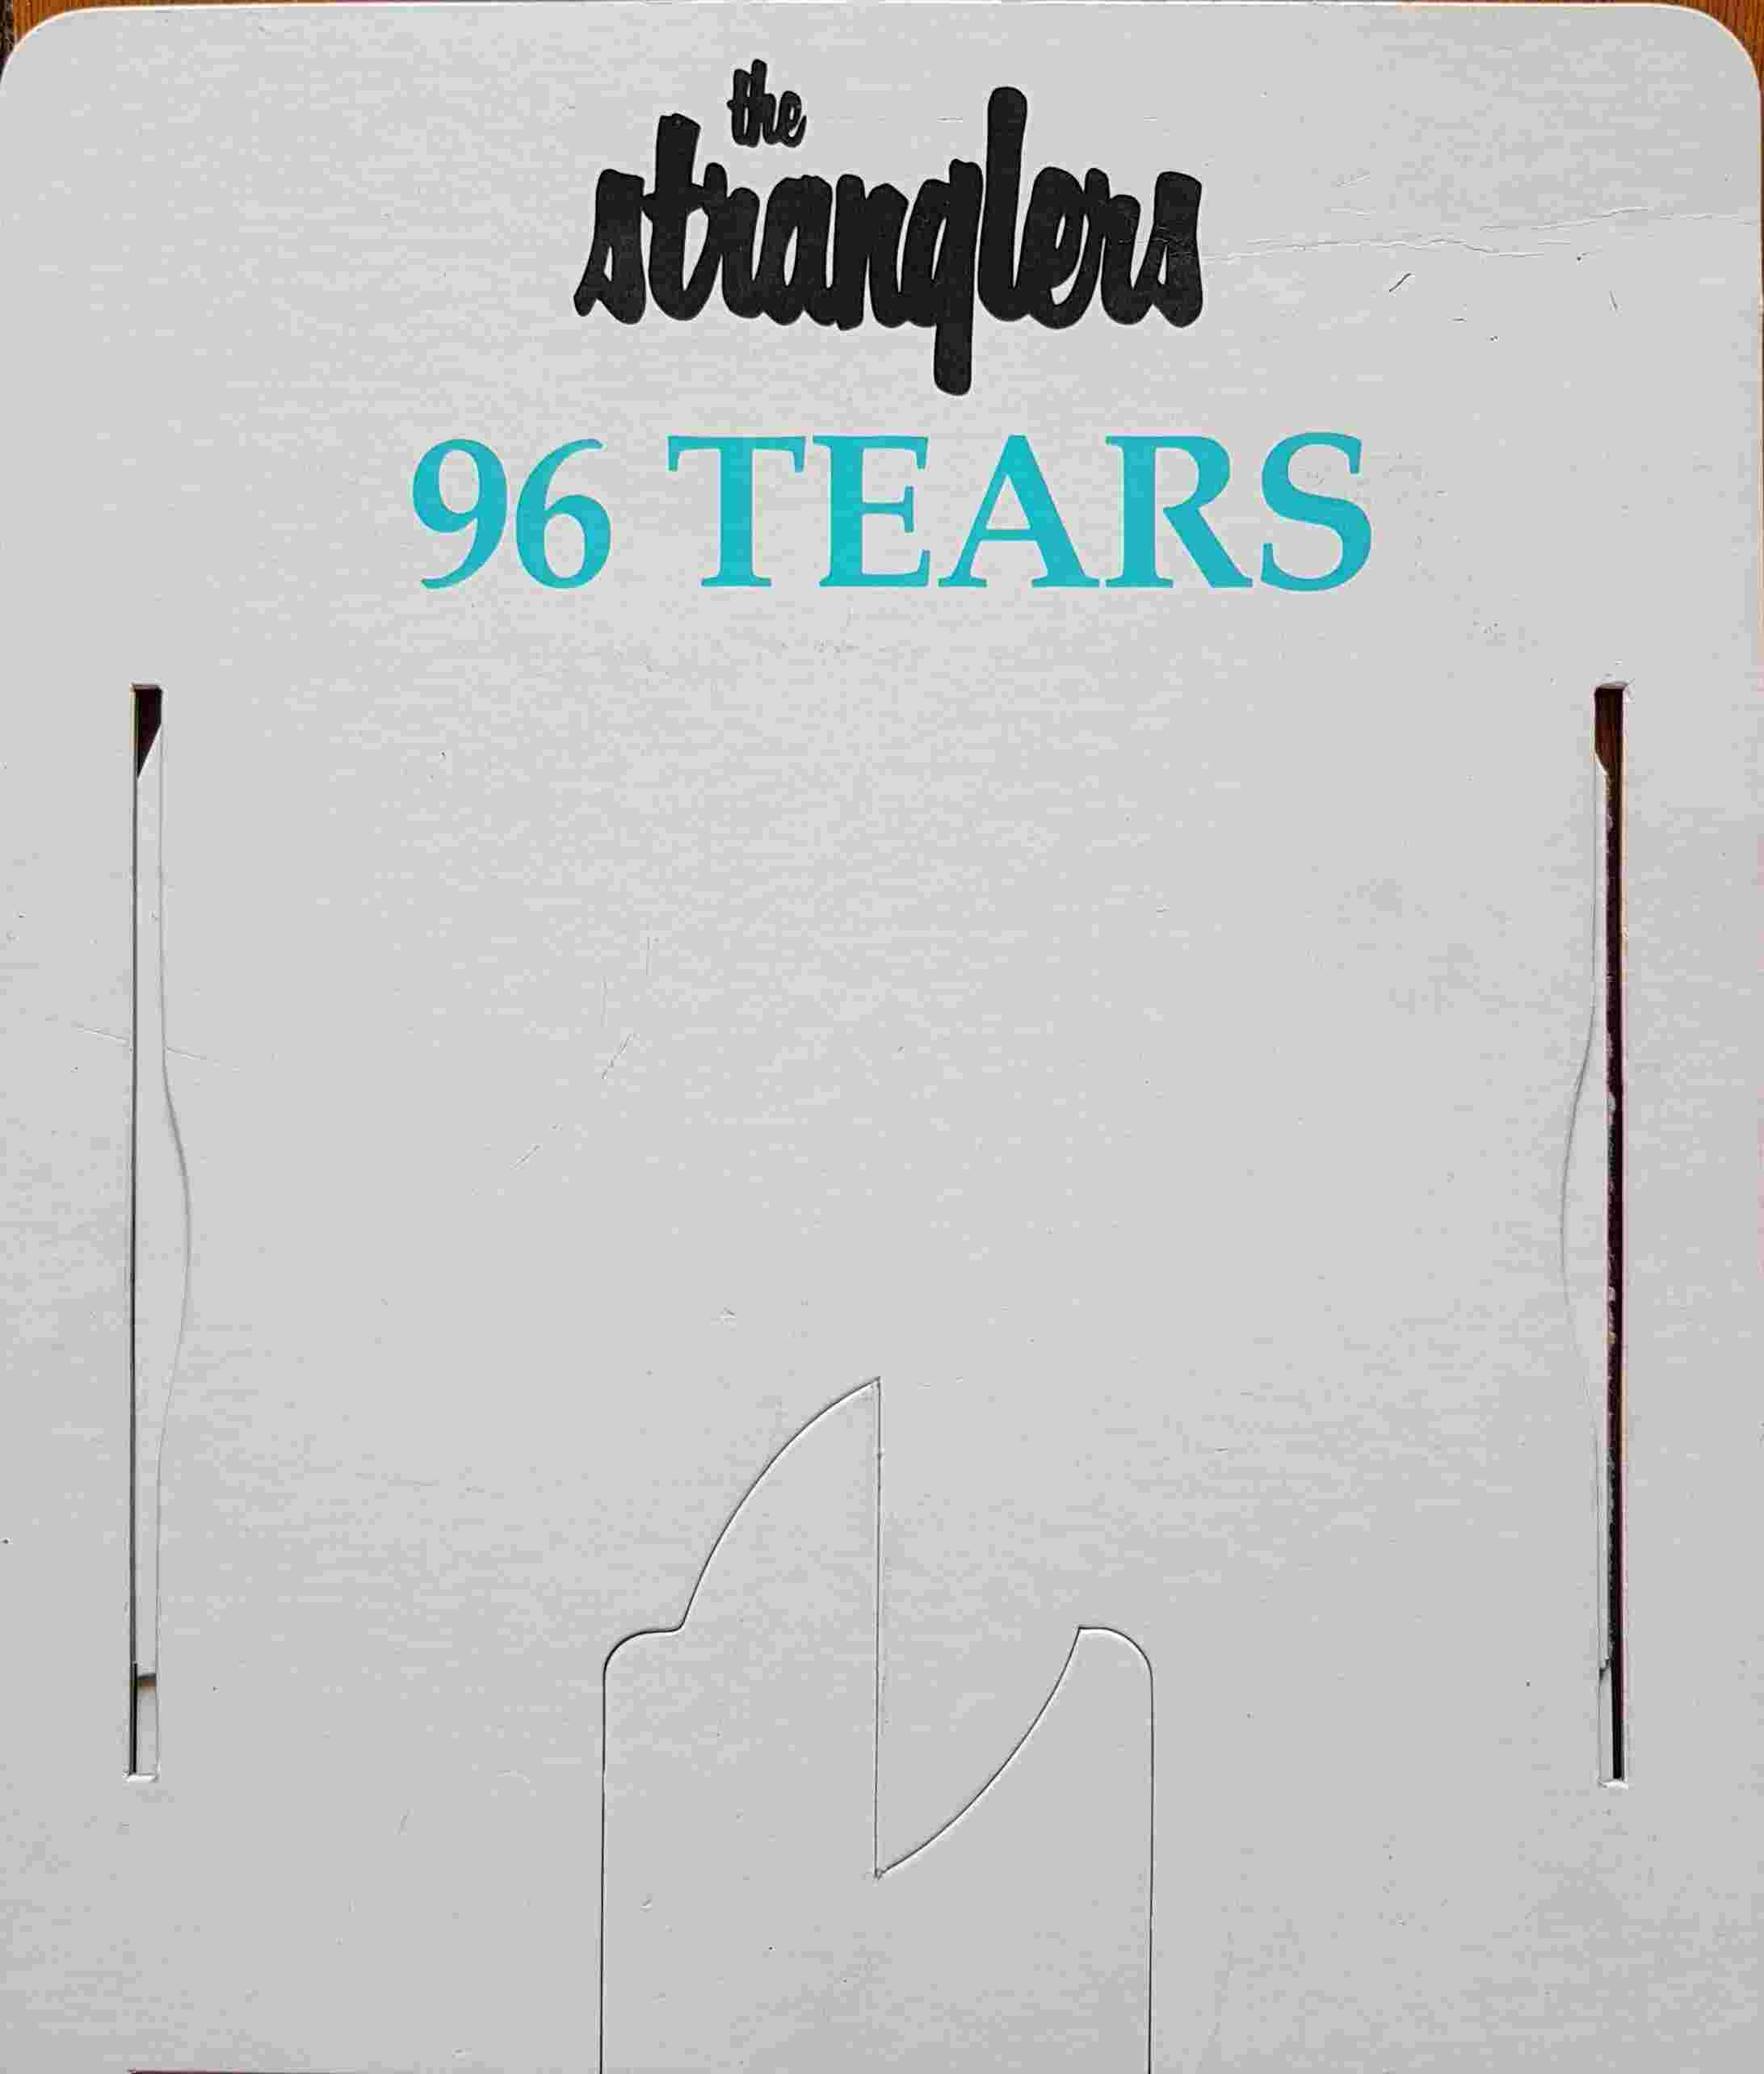 Picture of 96 tears by artist The Stranglers from The Stranglers anything_else